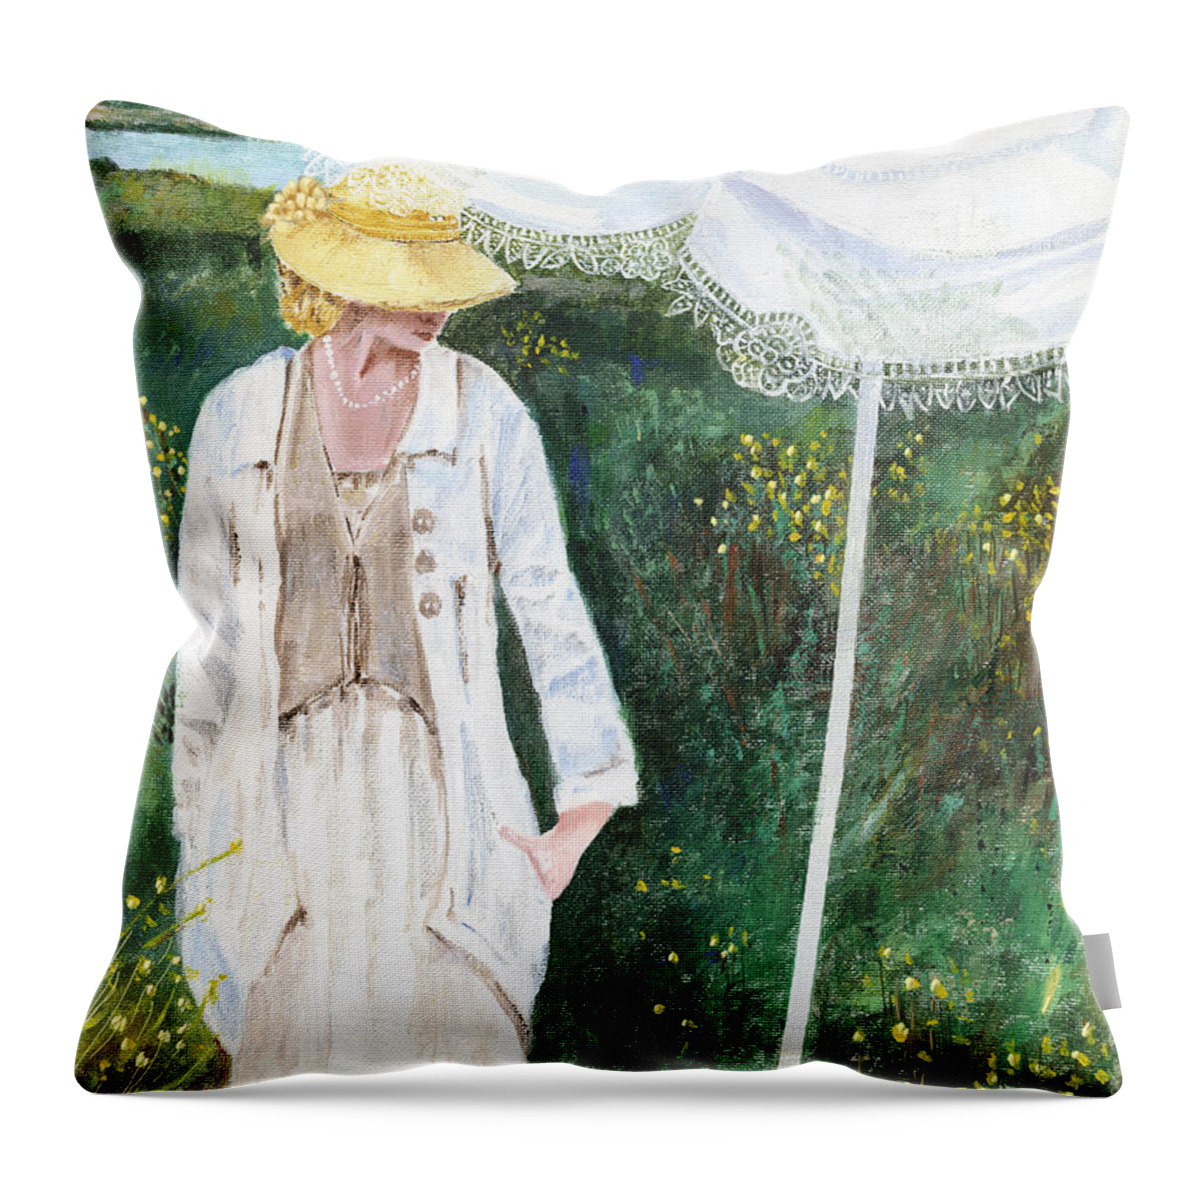 Lady Throw Pillow featuring the painting Lady And The Umbrella by Arline Wagner